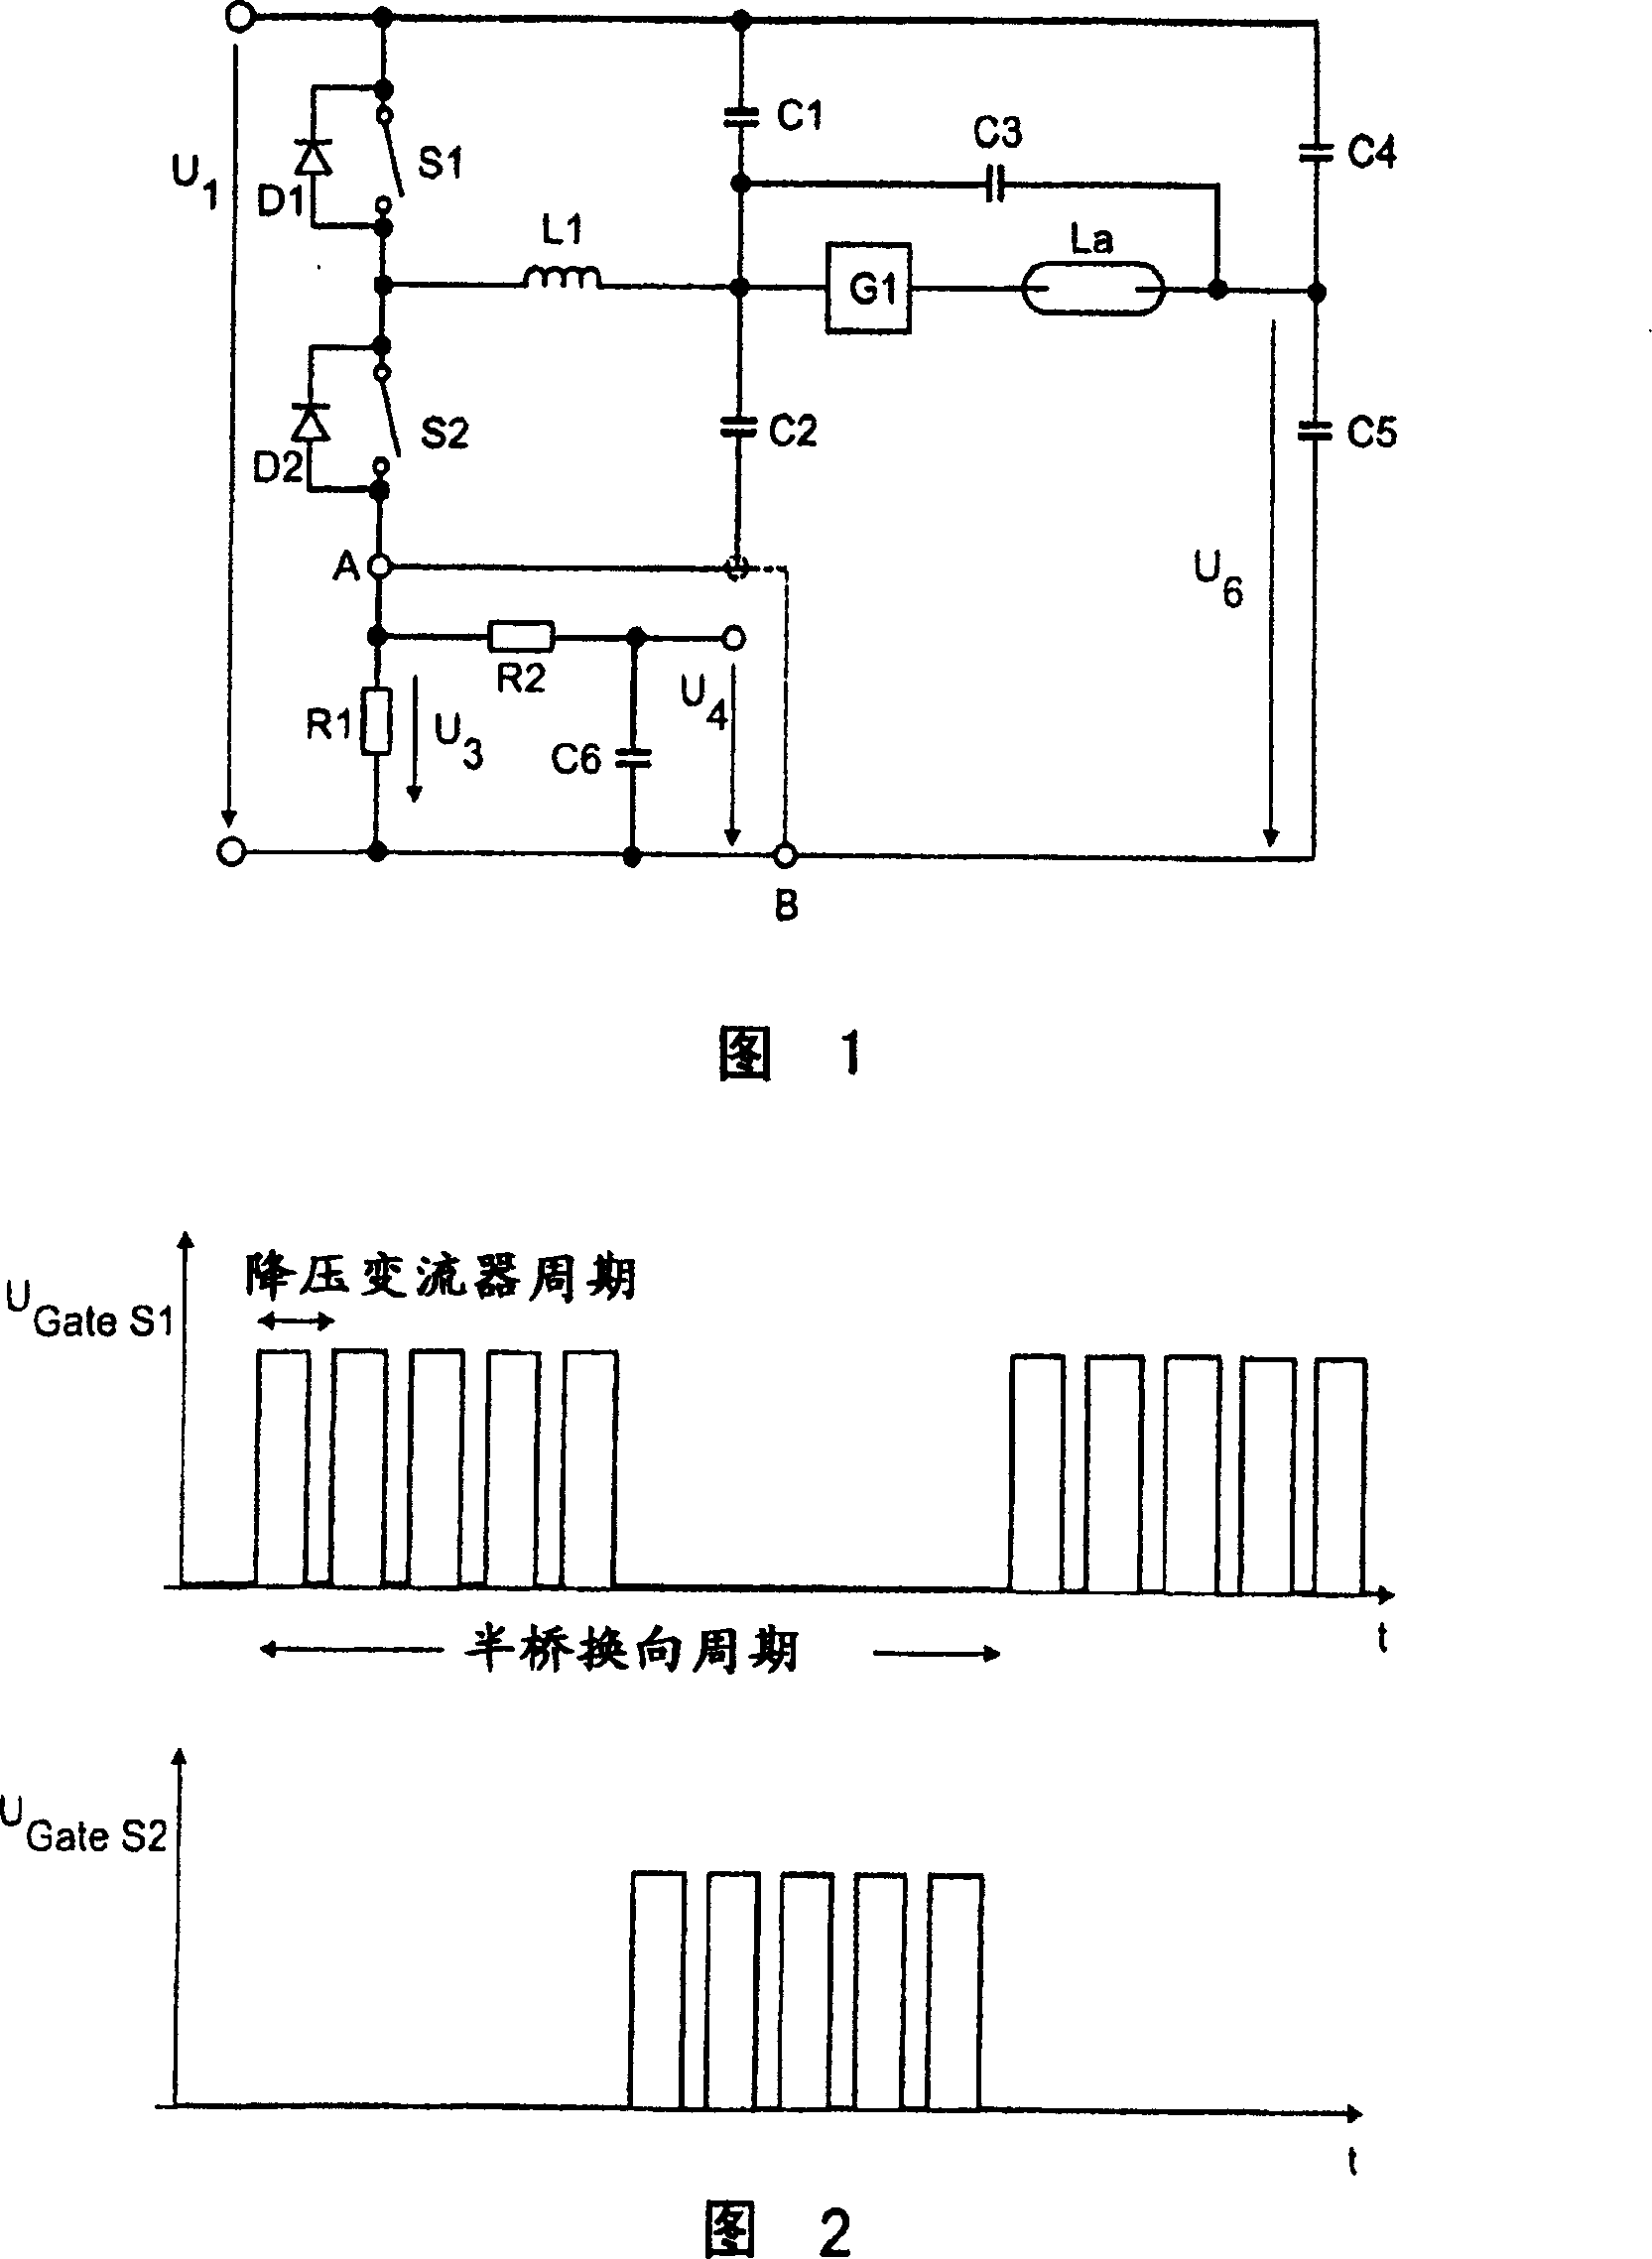 Electronic ballast, lighting device and method for operating high-pressure discharge lamps